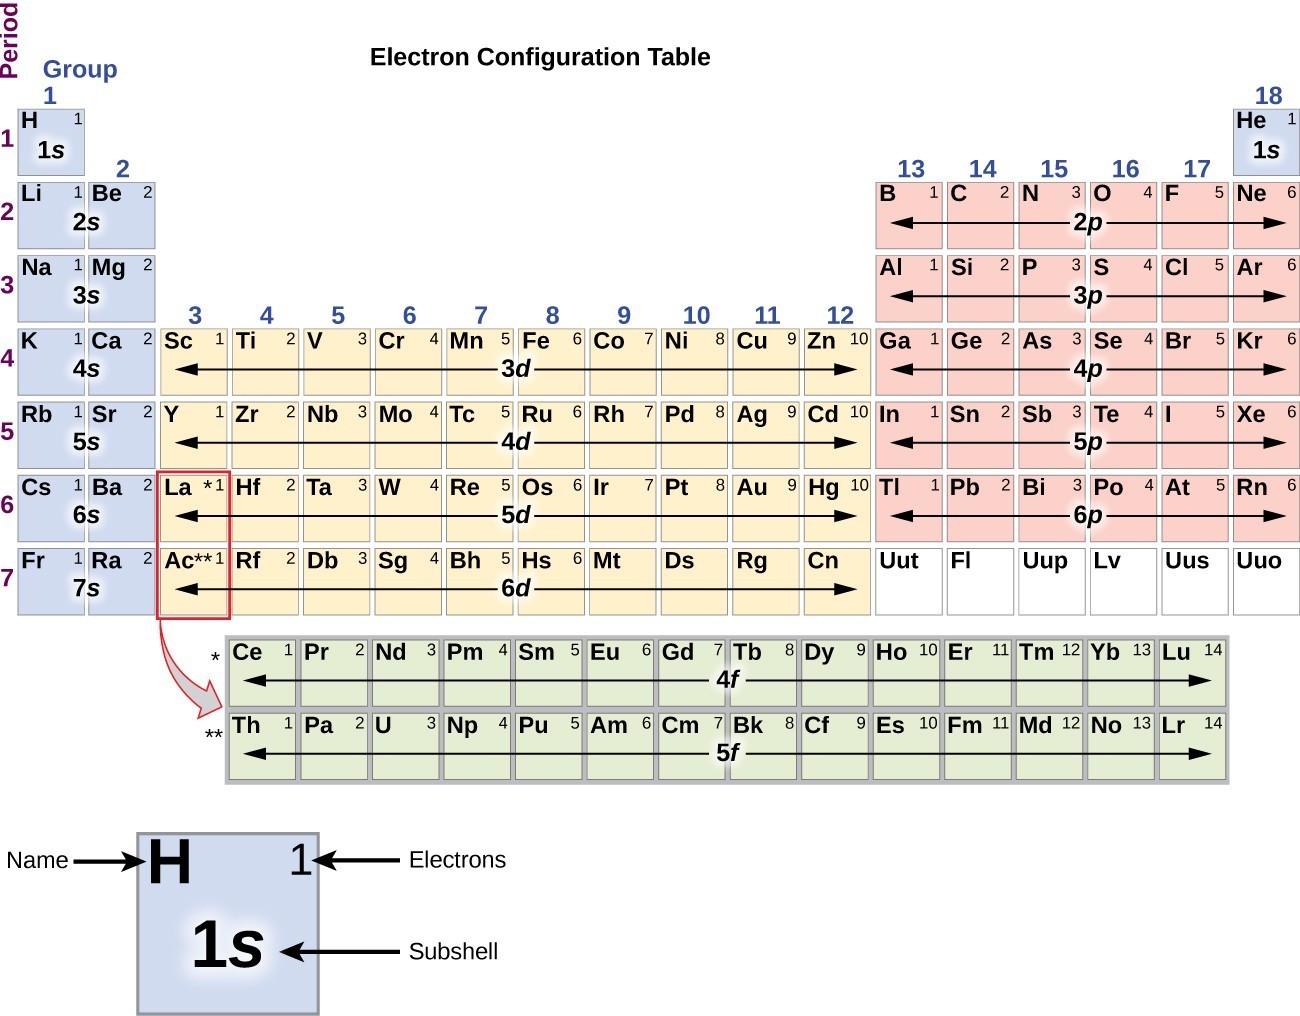 In this figure, a periodic table is shown that is entitled, “Electron Configuration Table.” Beneath the table, a square for the element hydrogen is shown enlarged to provide detail. The element symbol, H, is placed in the upper left corner. In the upper right is the number of electrons, 1. The lower central portion of the element square contains the subshell, 1 s. Helium and elements in groups 1 and 2 are shaded blue. In this region, the rows are labeled 1 s through 7 s moving down the table. Groups 3 through 12 are shaded orange, and the rows are labeled 3 d through 6 d moving down the table. Groups 13 through 18, except helium, are shaded pink and are labeled 2 p through 6 p moving down the table. The lanthanide and actinide series across the bottom of the table are shaded grey and are labeled 4 f and 5 f respectively.